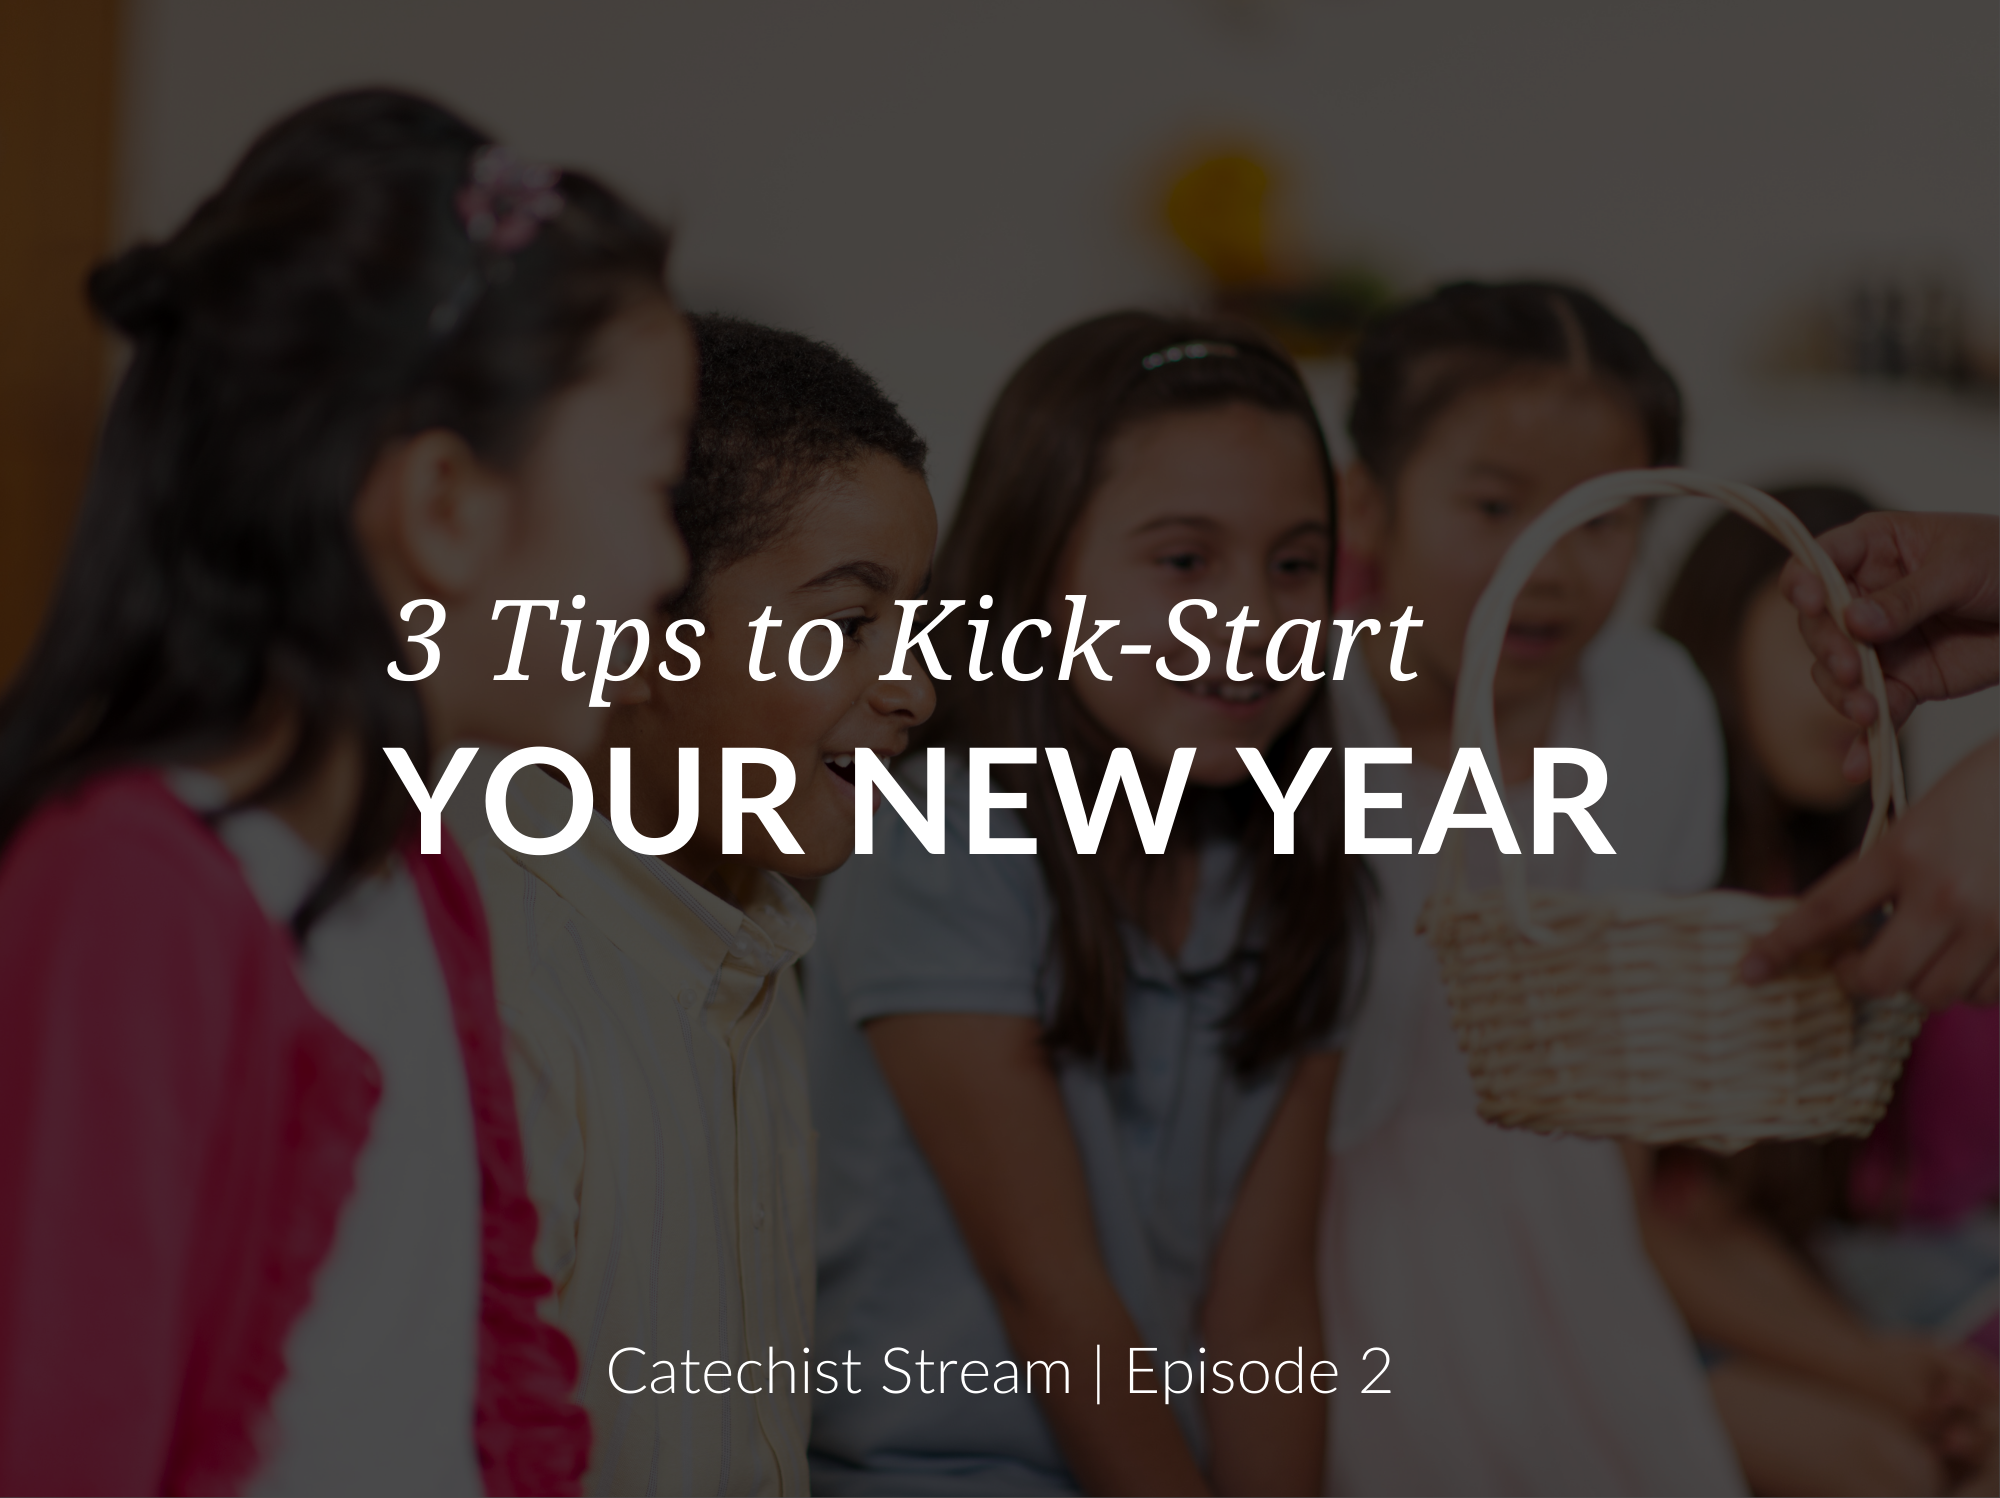 3-tips-to-kick-start-your-new-year-catechist-stream